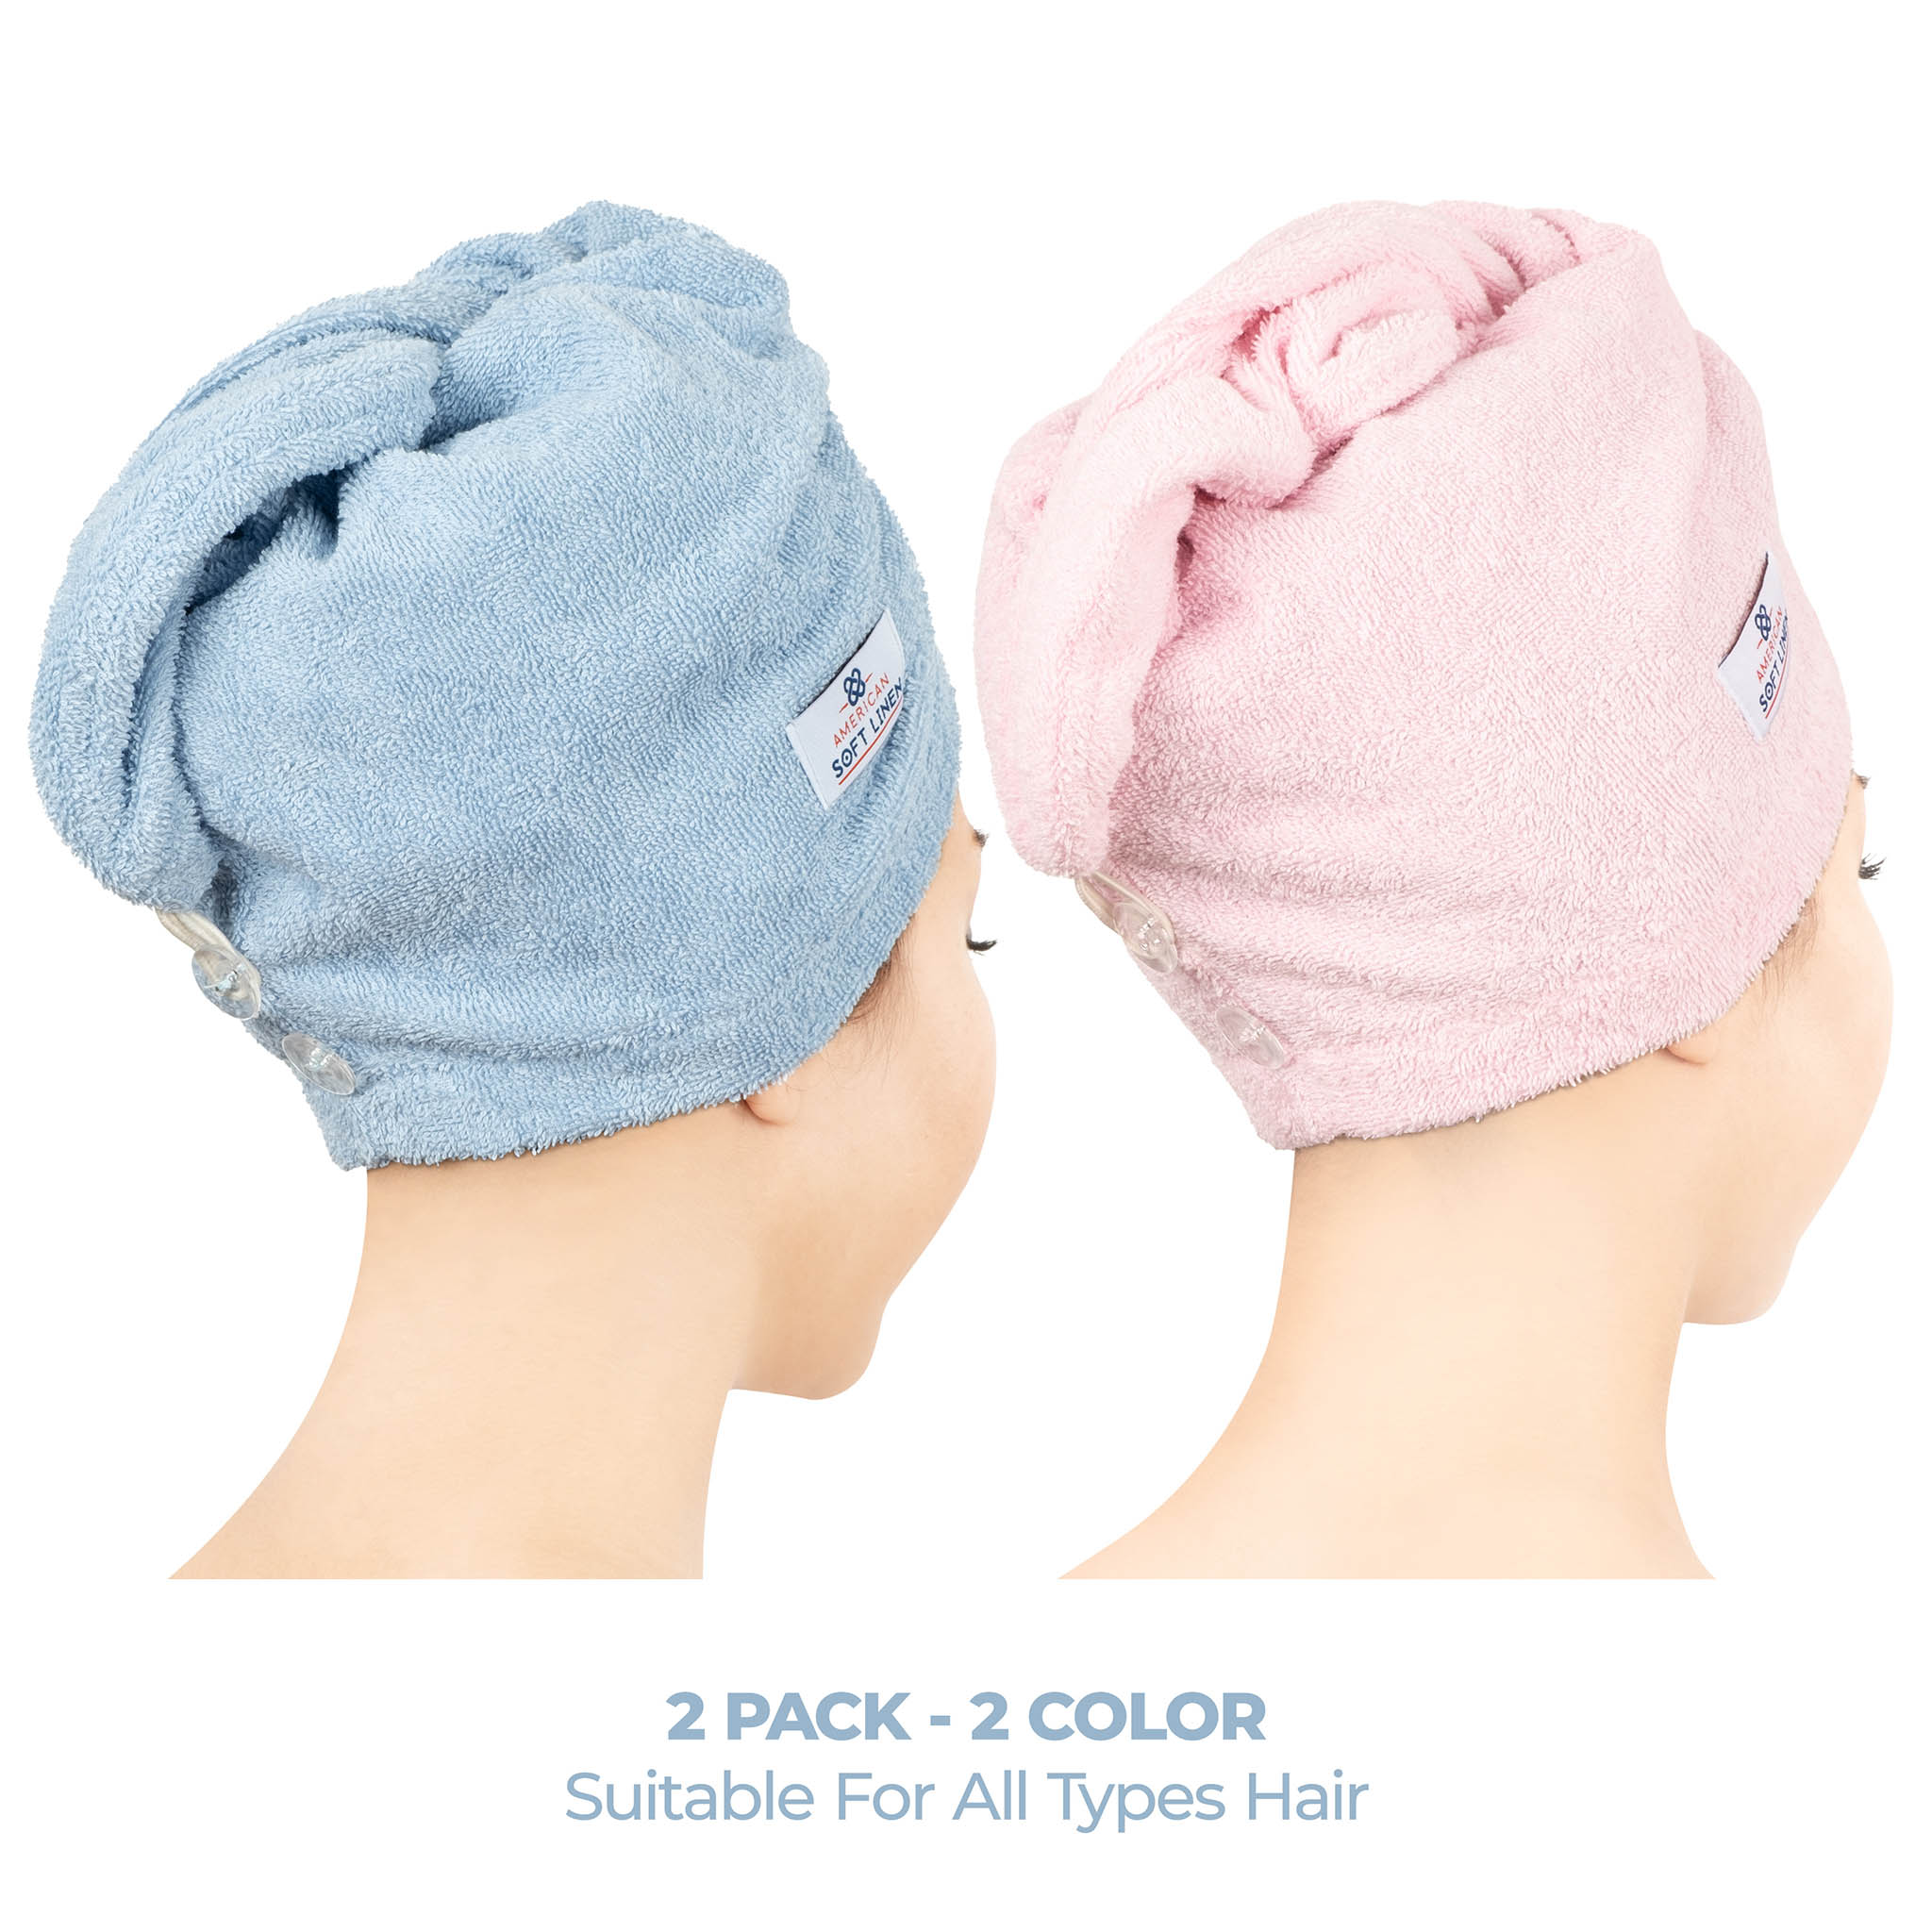 American Soft Linen 100% Cotton Hair Drying Towels for Women 2 pack 75 set case pack sky blue-pink-2